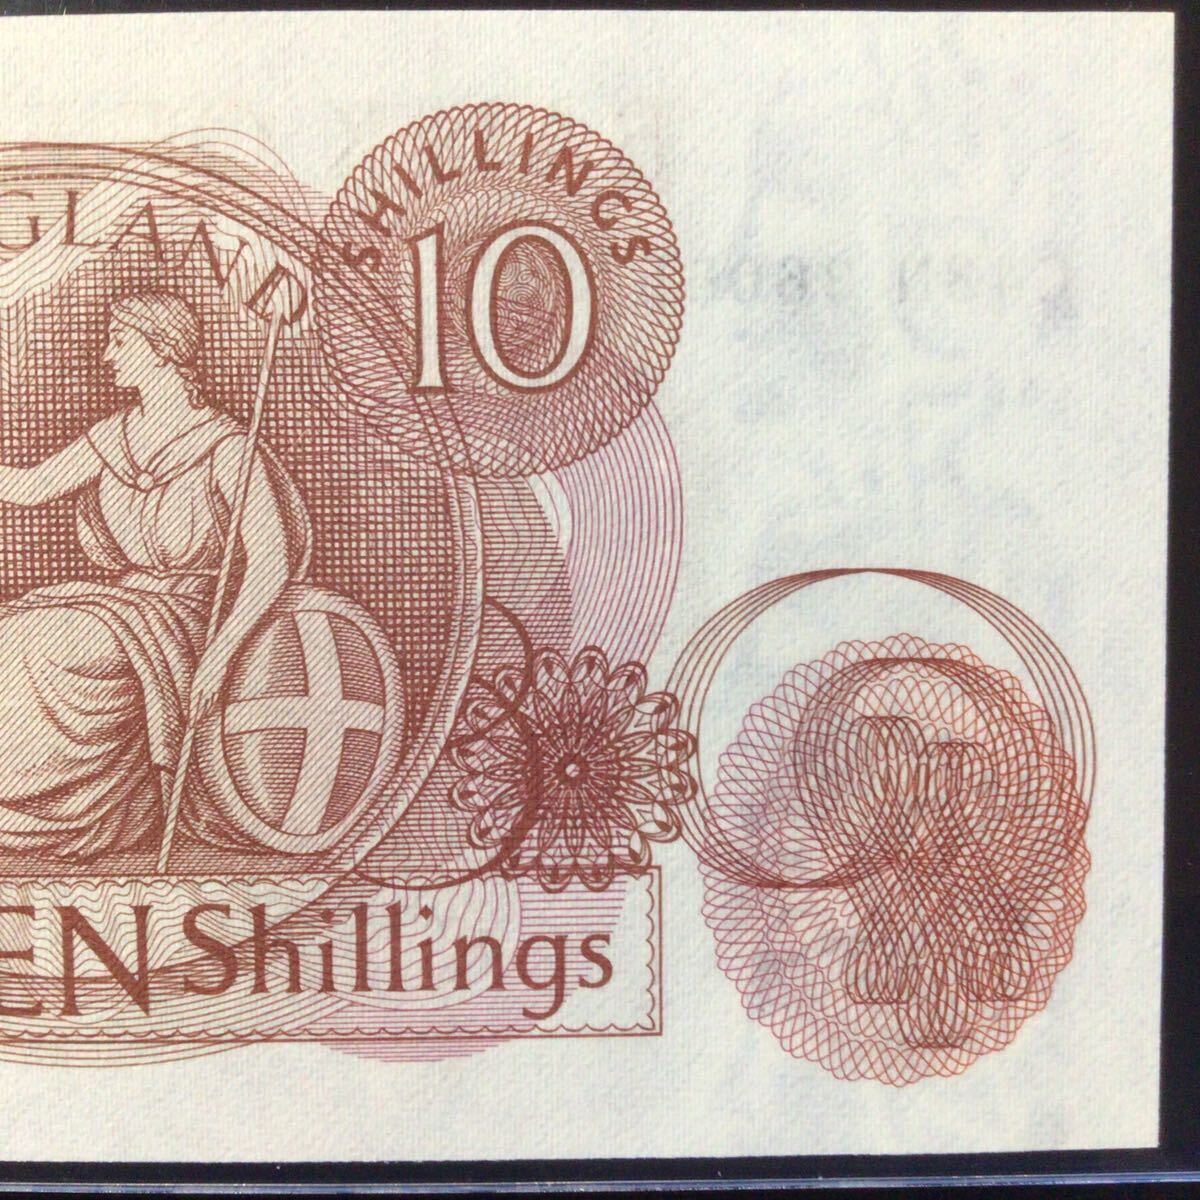 World Banknote Grading GREAT BRITAIN《Bank of England》10 Shillings【1966-70】『PCGS Grading Superb Gem Uncirculated 67 PPQ』._画像7